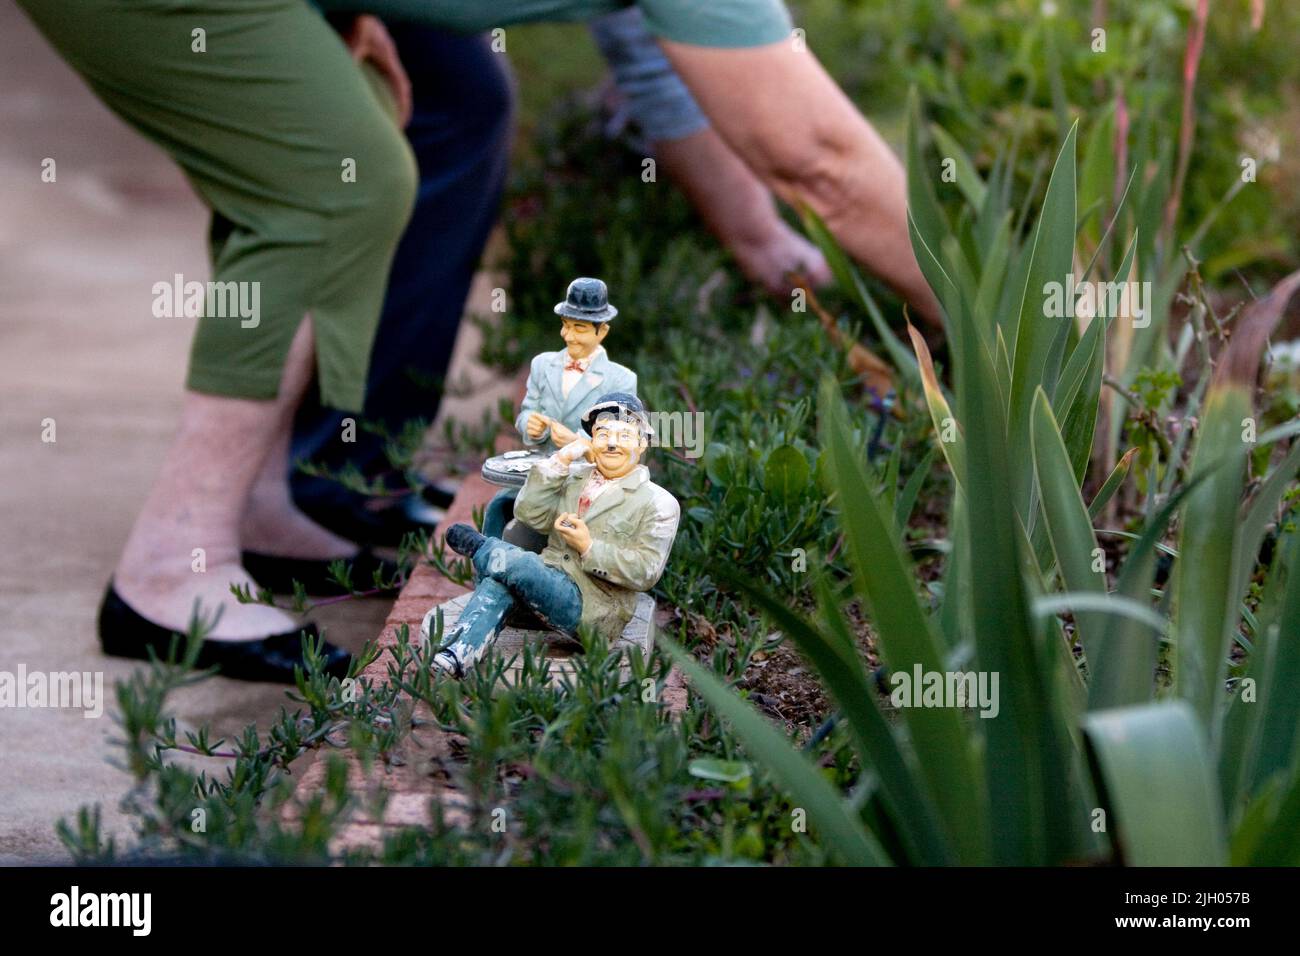 ELDERLY WOMEN GARDENING IN AN AGED CARE FACILITY Stock Photo